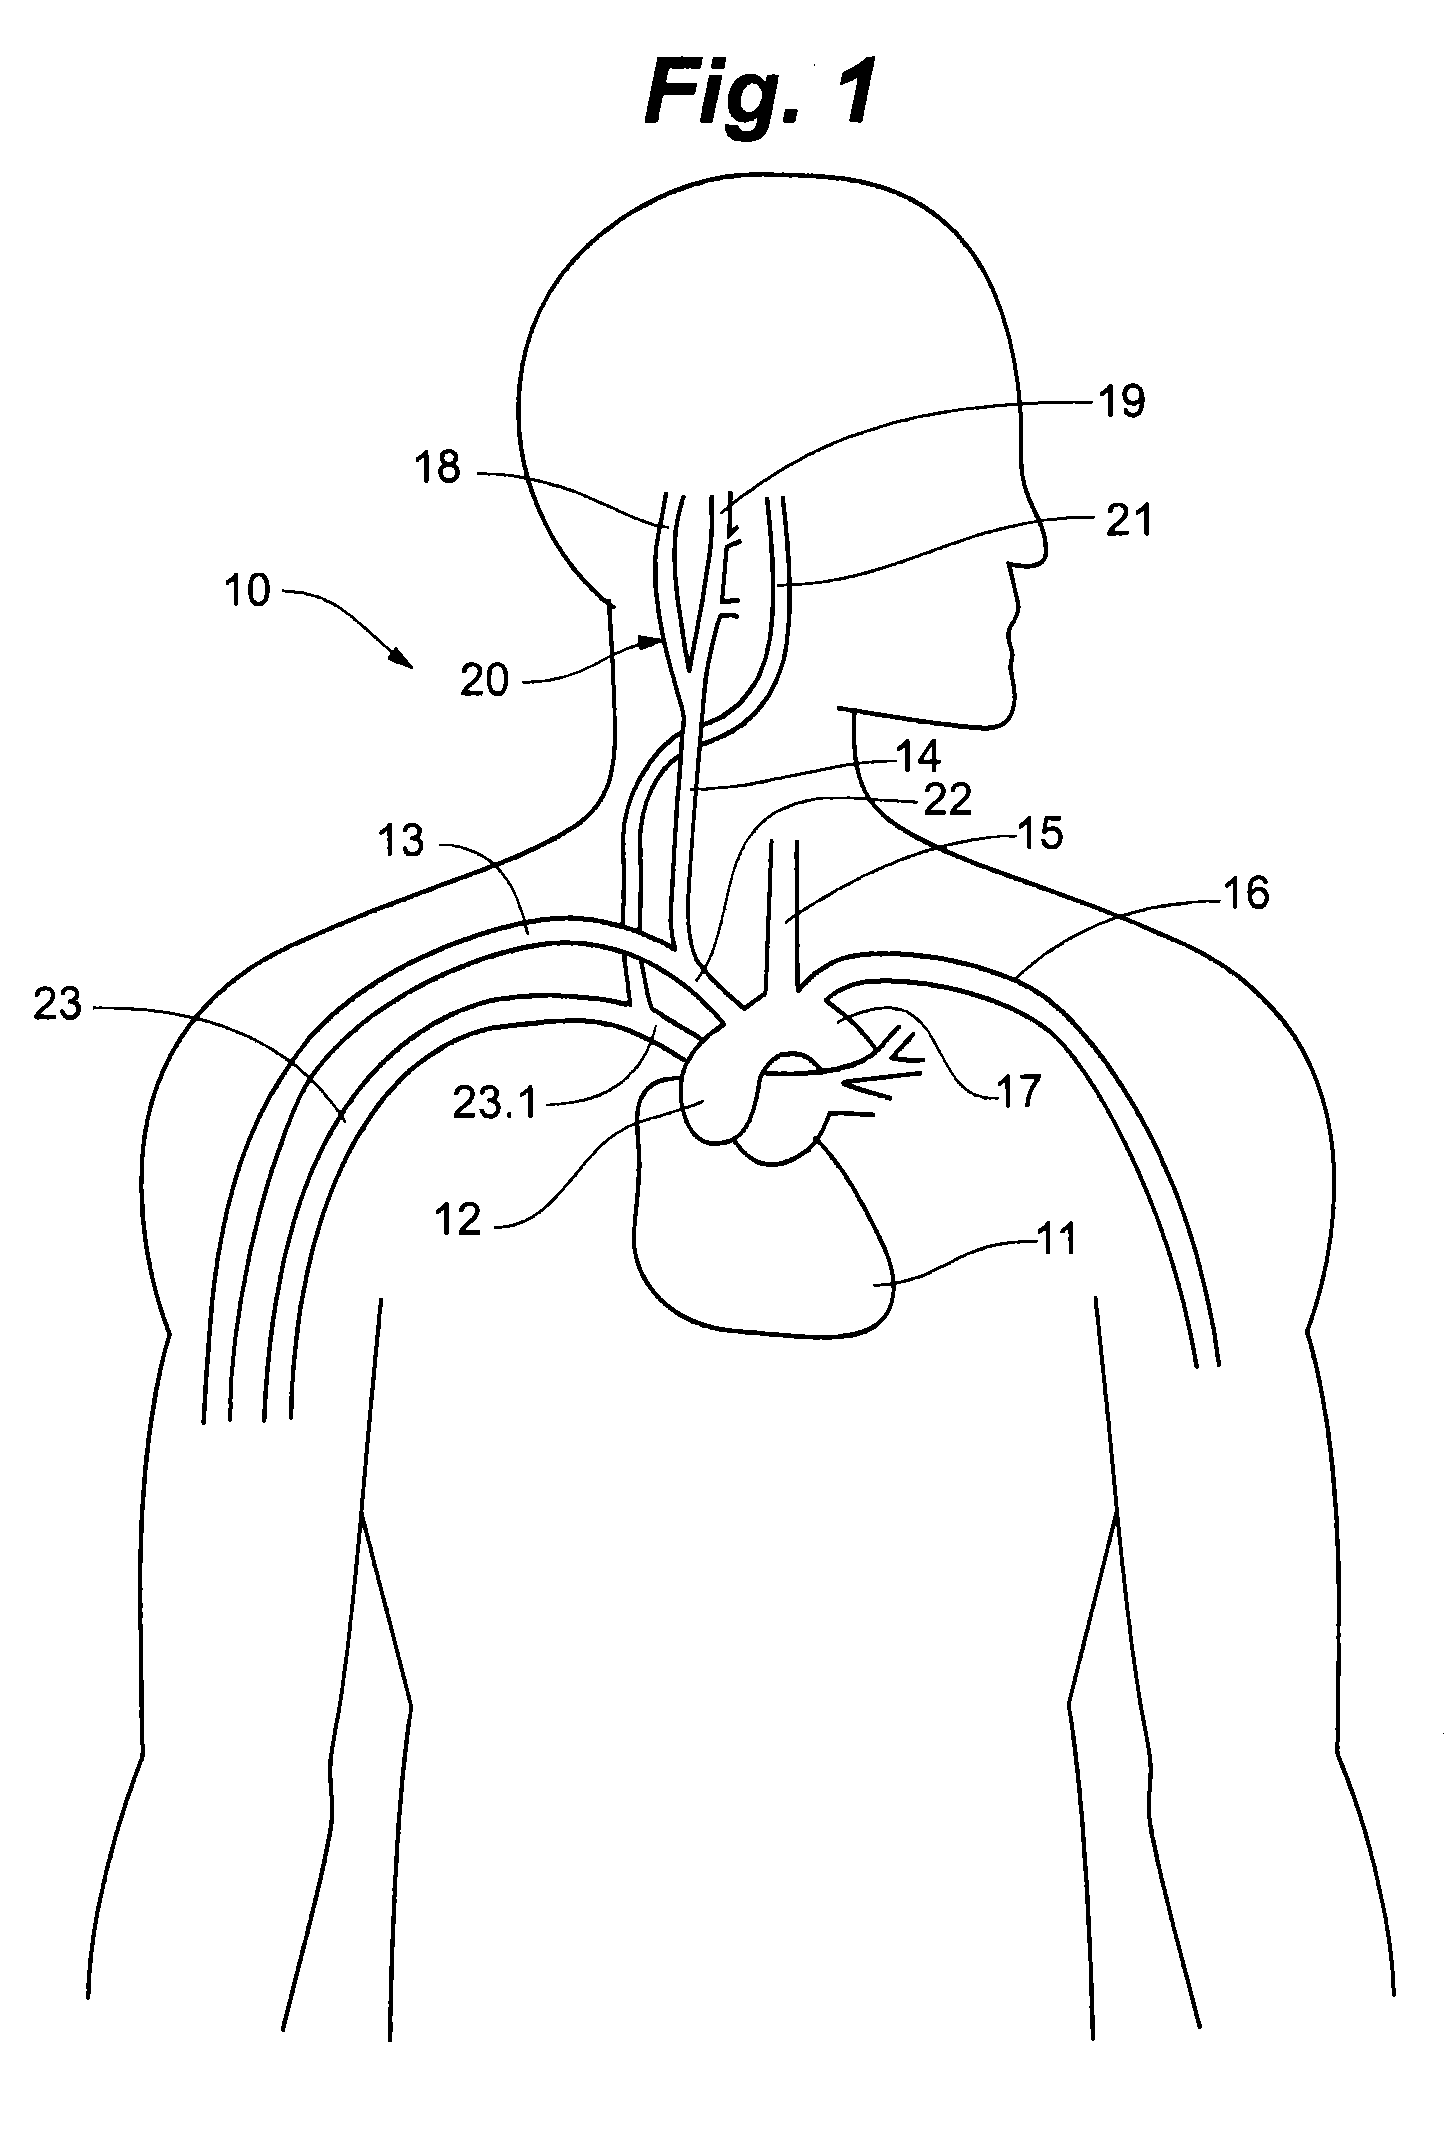 Method for monitoring physiological cycles of a patient to optimize patient therapy